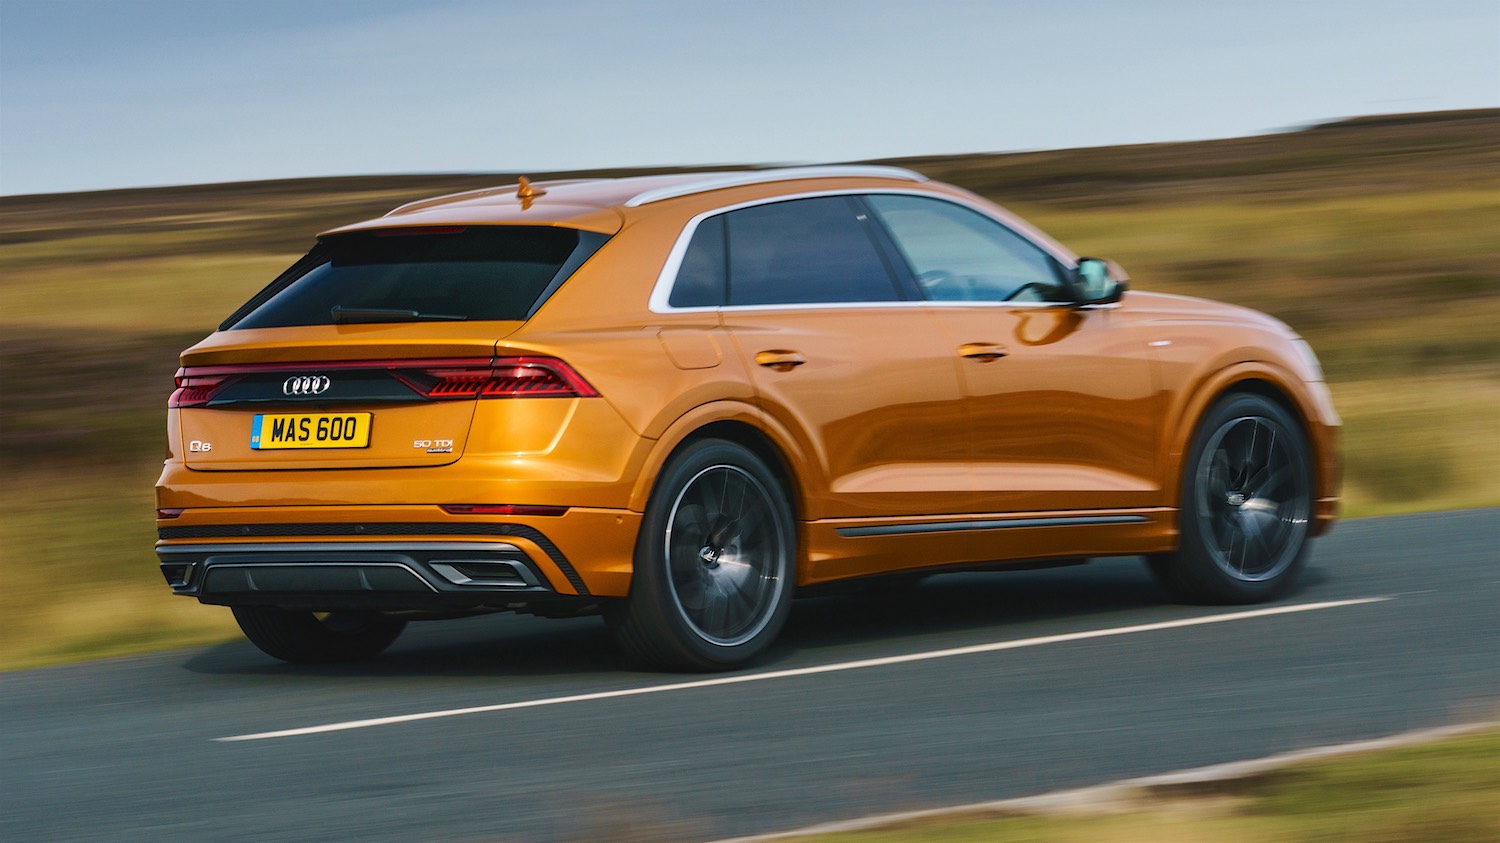 Maggie Barry reviews the All-New Audi Q8 Vorsprung edition for drive 2